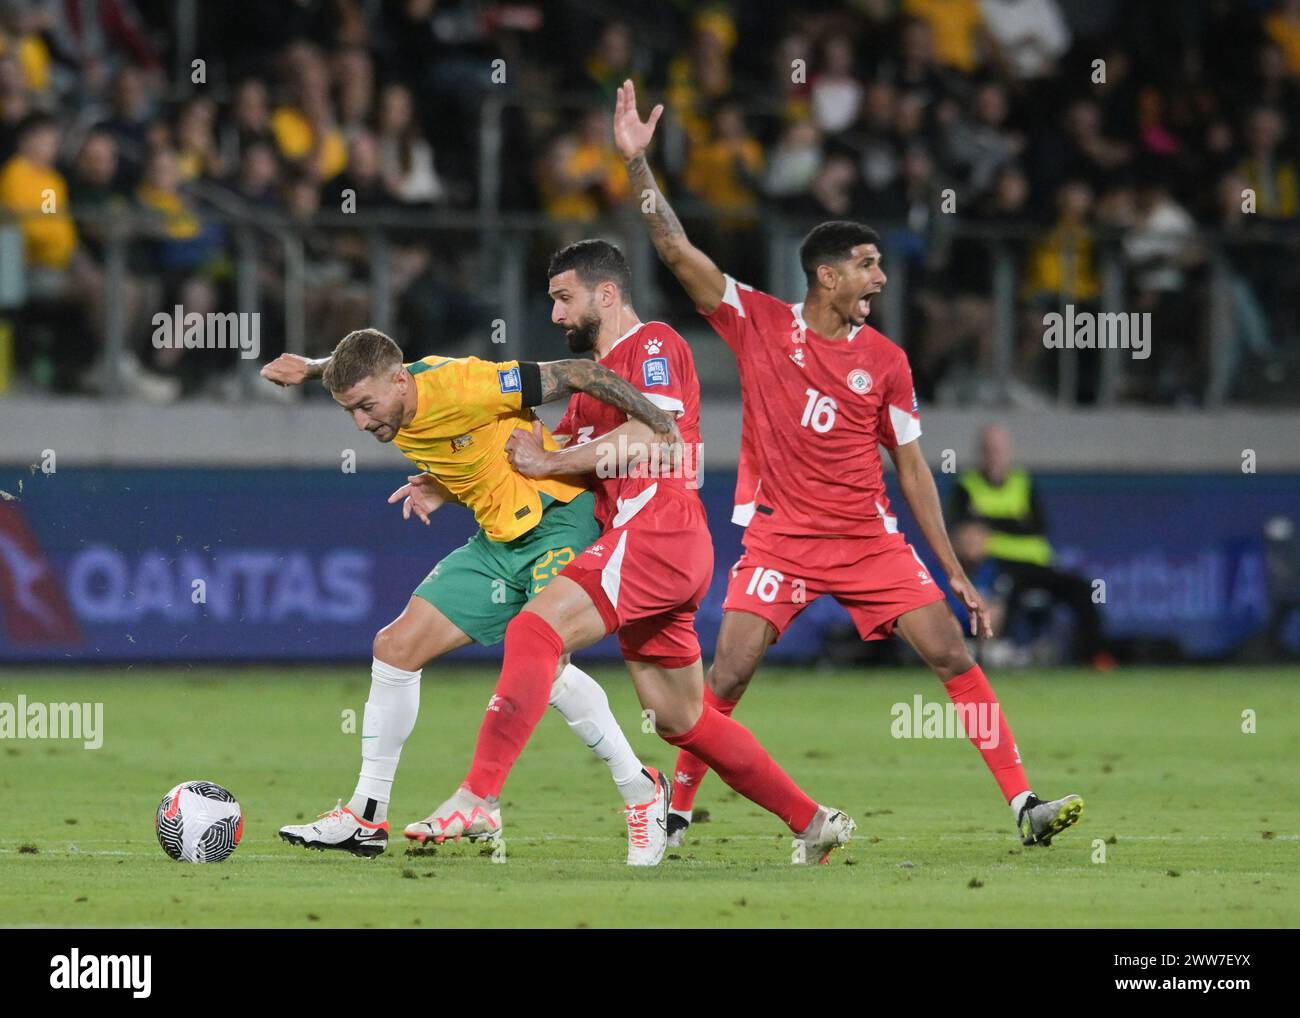 Adam Taggart (L) of Australia football team, Maher Sabra (M) and Walid Shour (R) of Lebanon football team are seen in action during the FIFA World Cup 2026 Qualifier Round 2 match between Australia and Lebanon held at the CommBank Stadium. Final score; Australia 2:0 Lebanon. (Photo by Luis Veniegra / SOPA Images/Sipa USA) Stock Photo